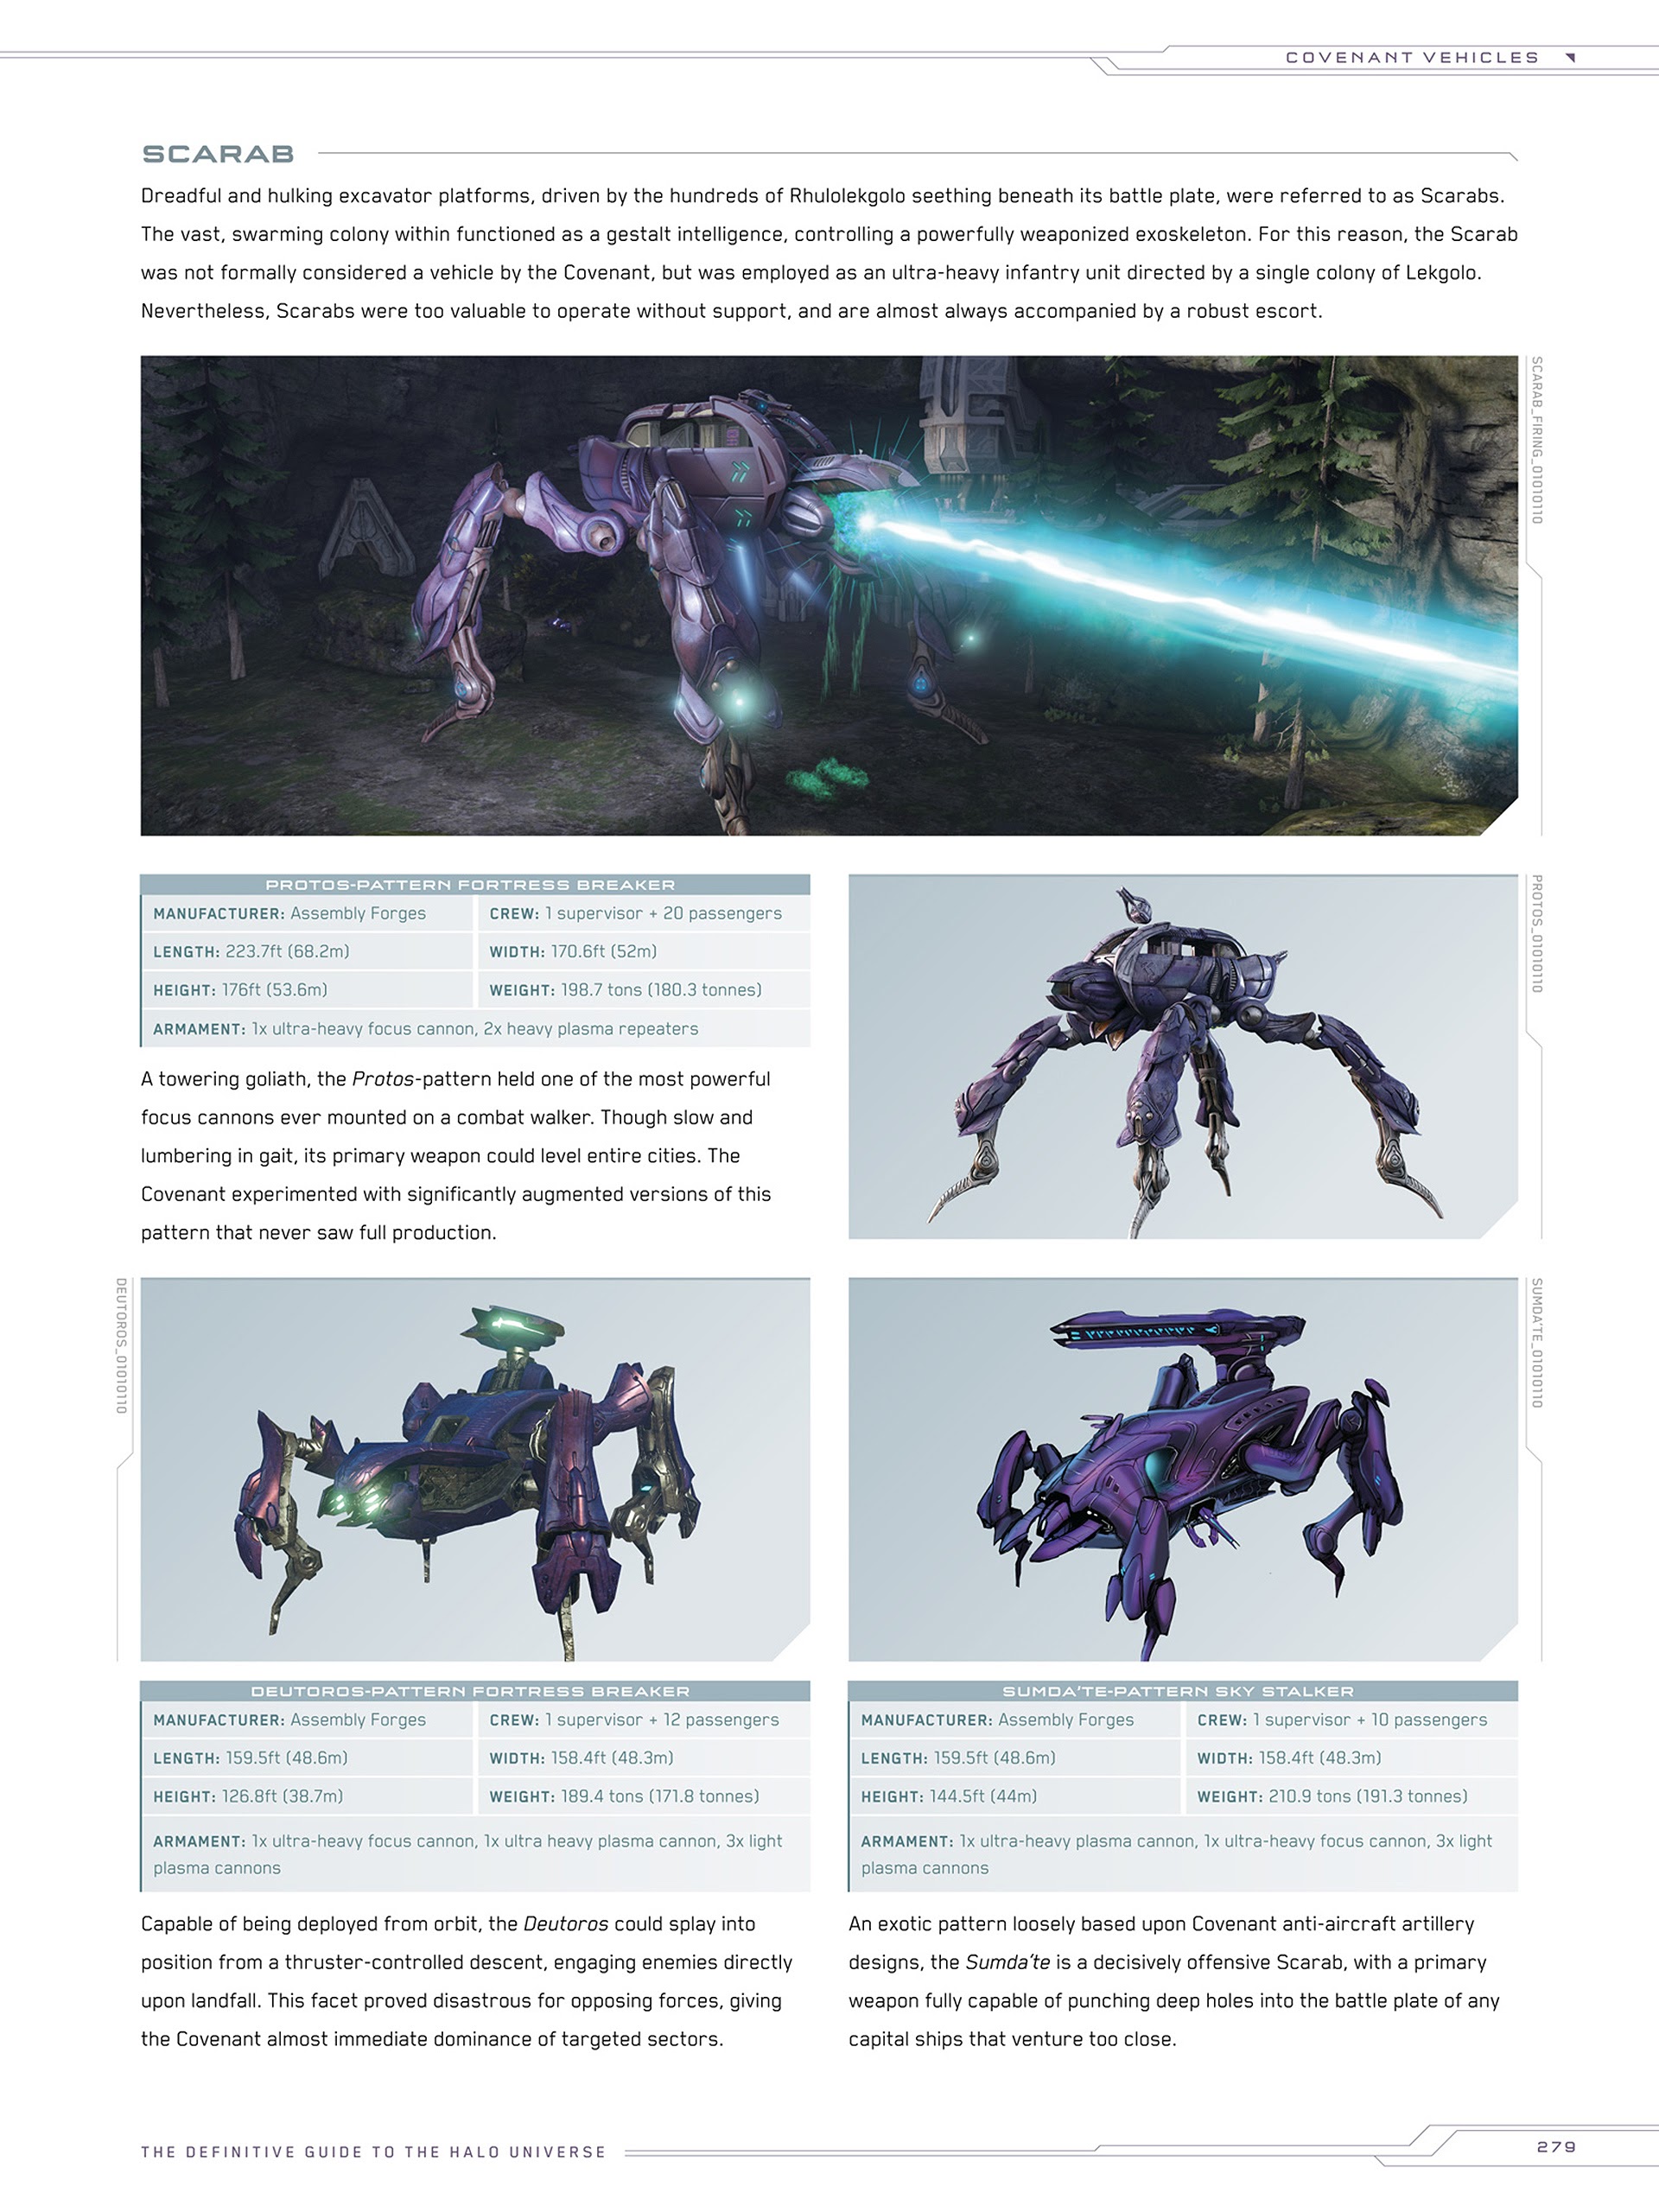 Read online Halo Encyclopedia comic -  Issue # TPB (Part 3) - 75